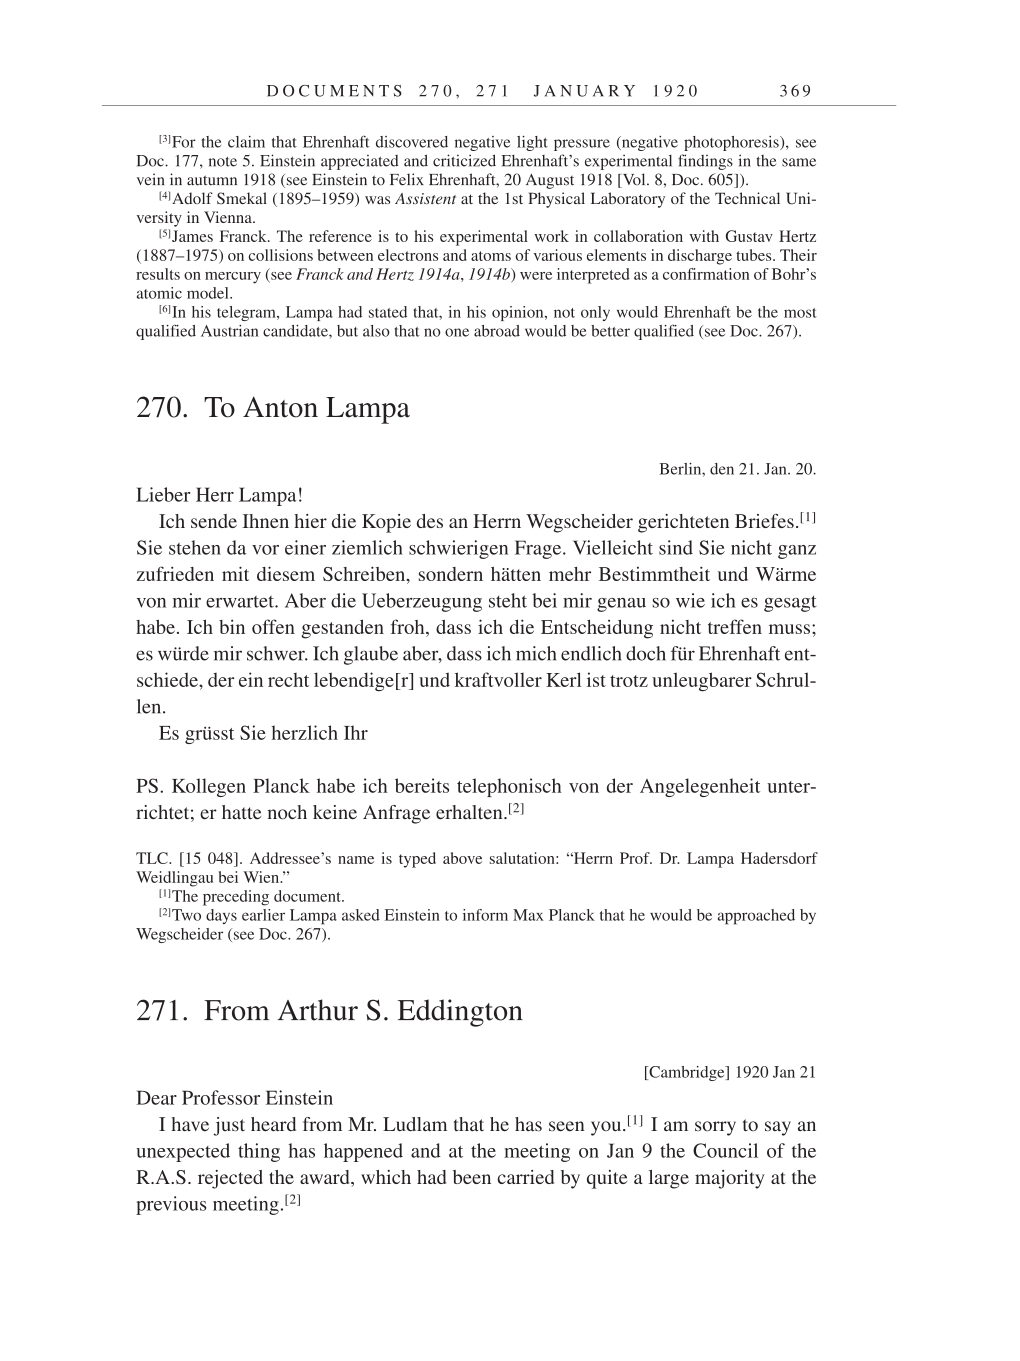 Volume 9: The Berlin Years: Correspondence January 1919-April 1920 page 369